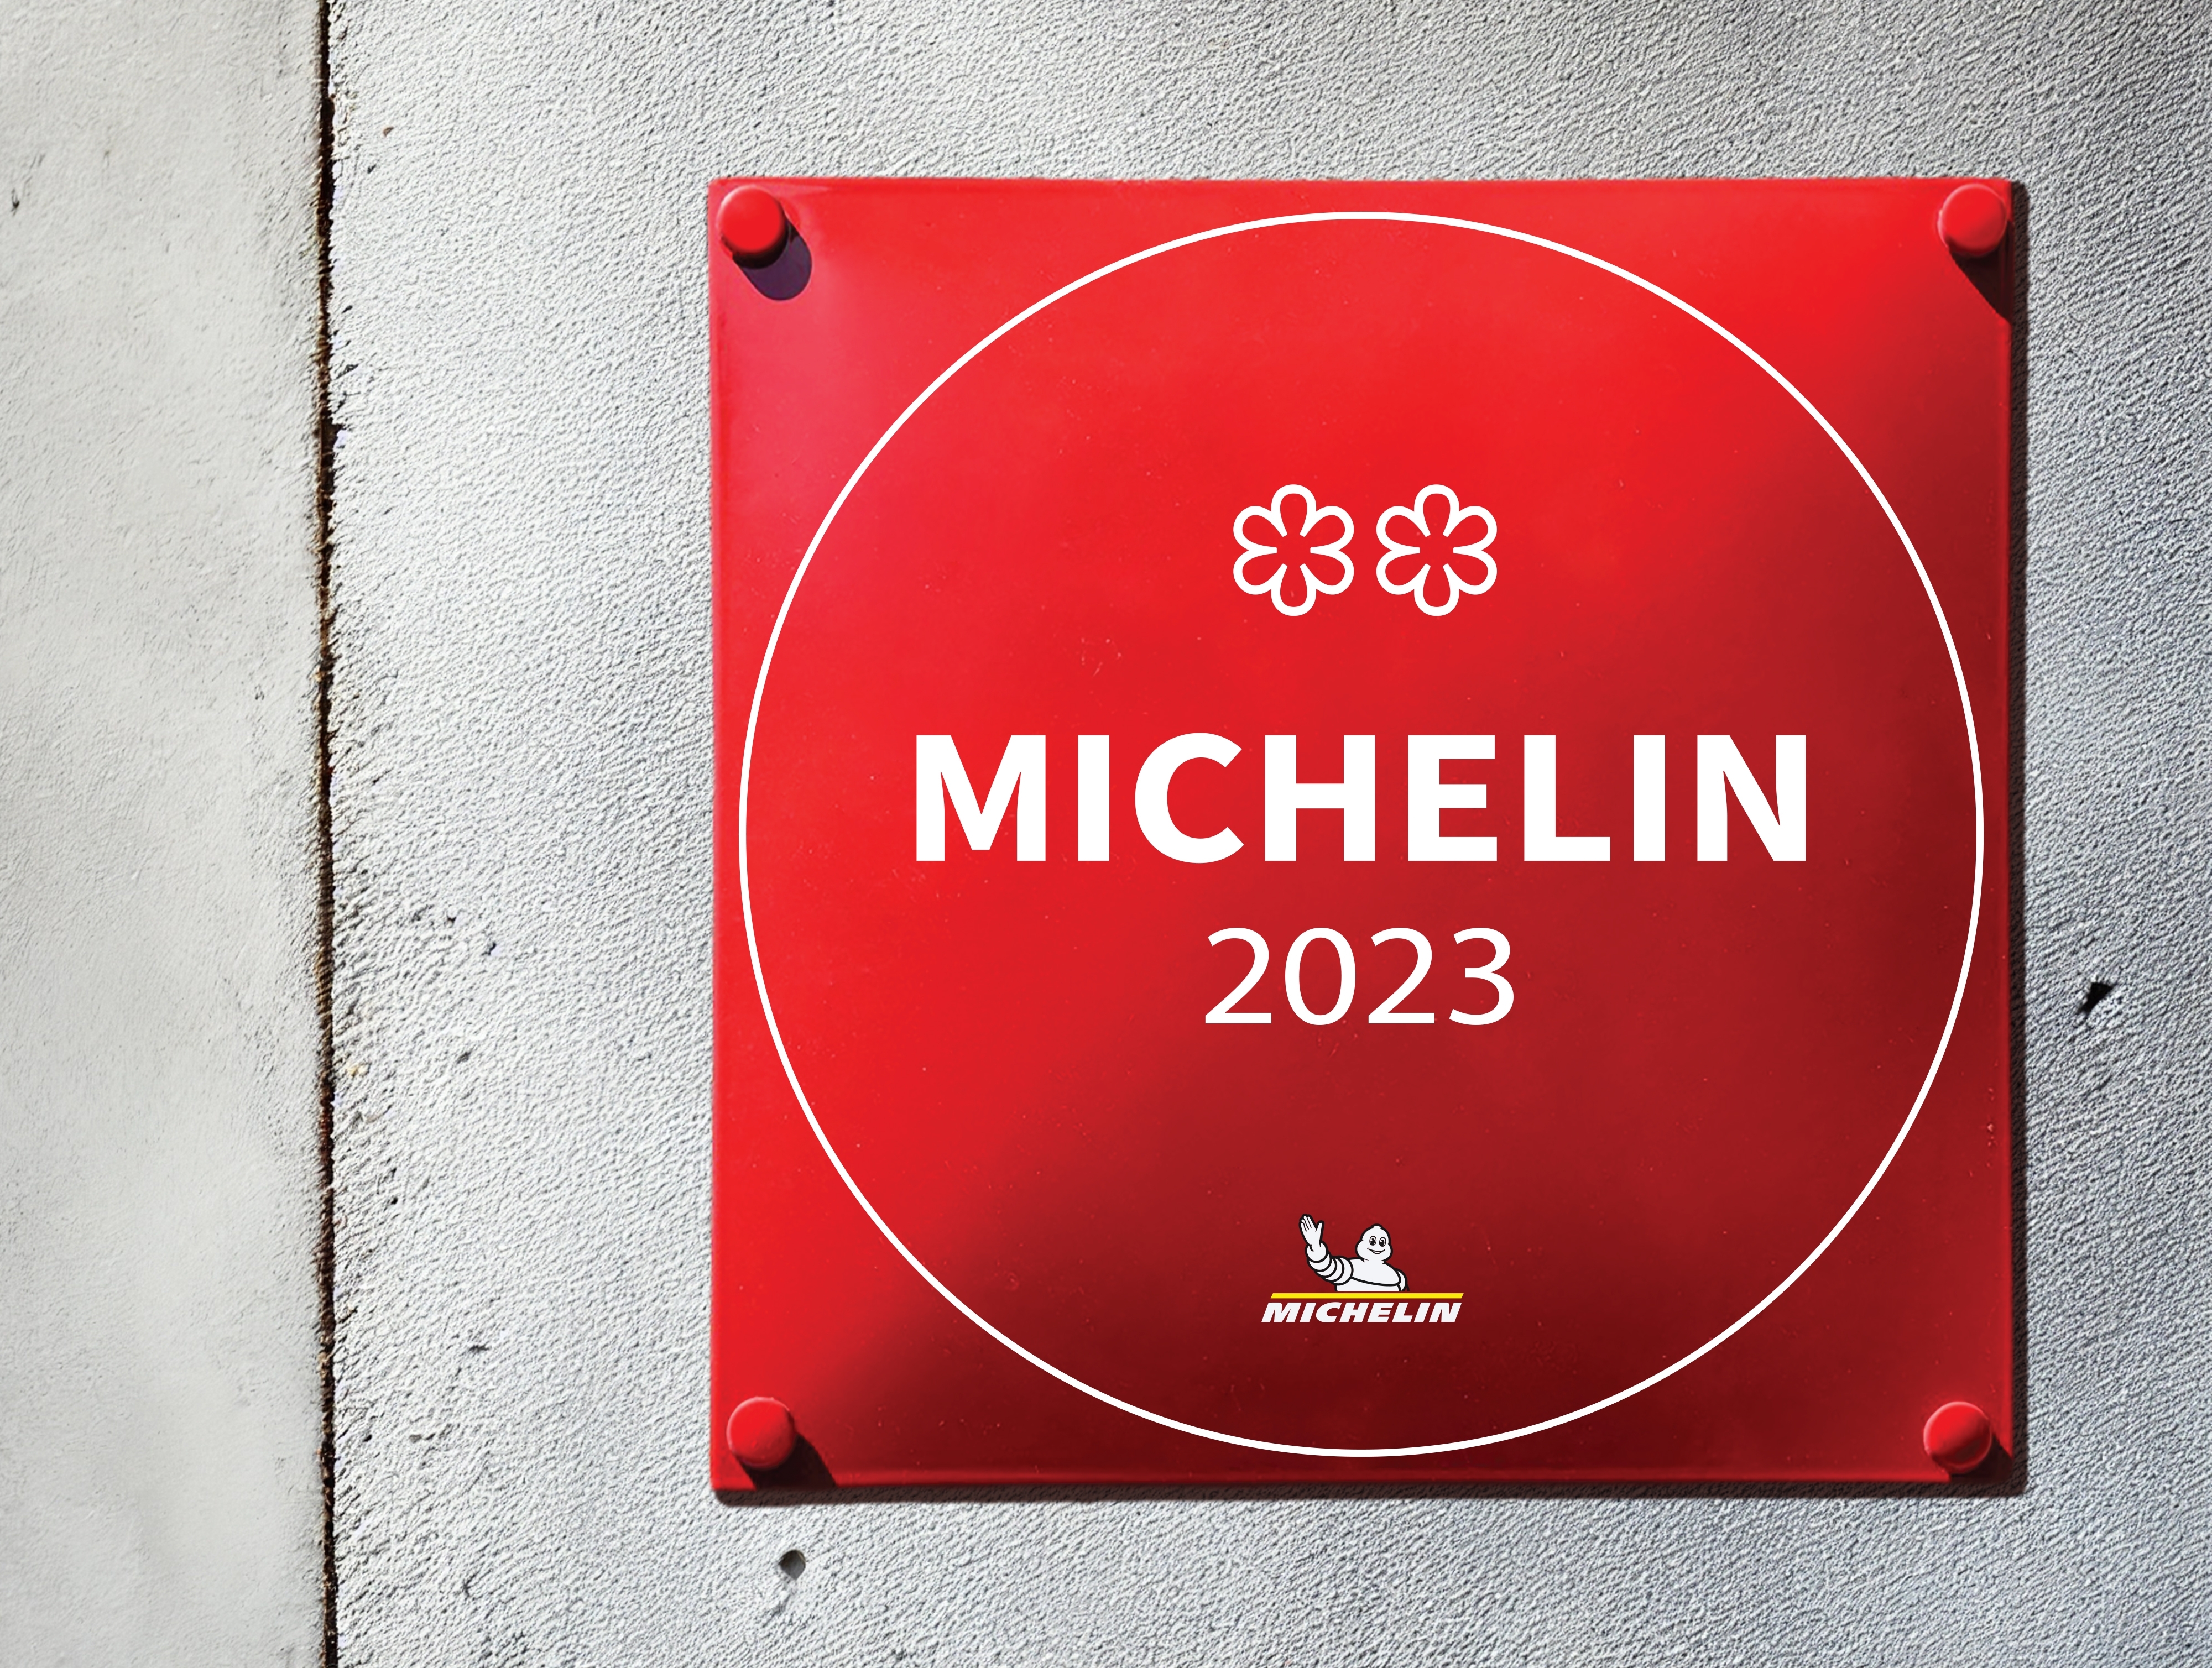 A red plaque posted outside of a restaurant displaying its Michelin ranking of two stars in 2023.